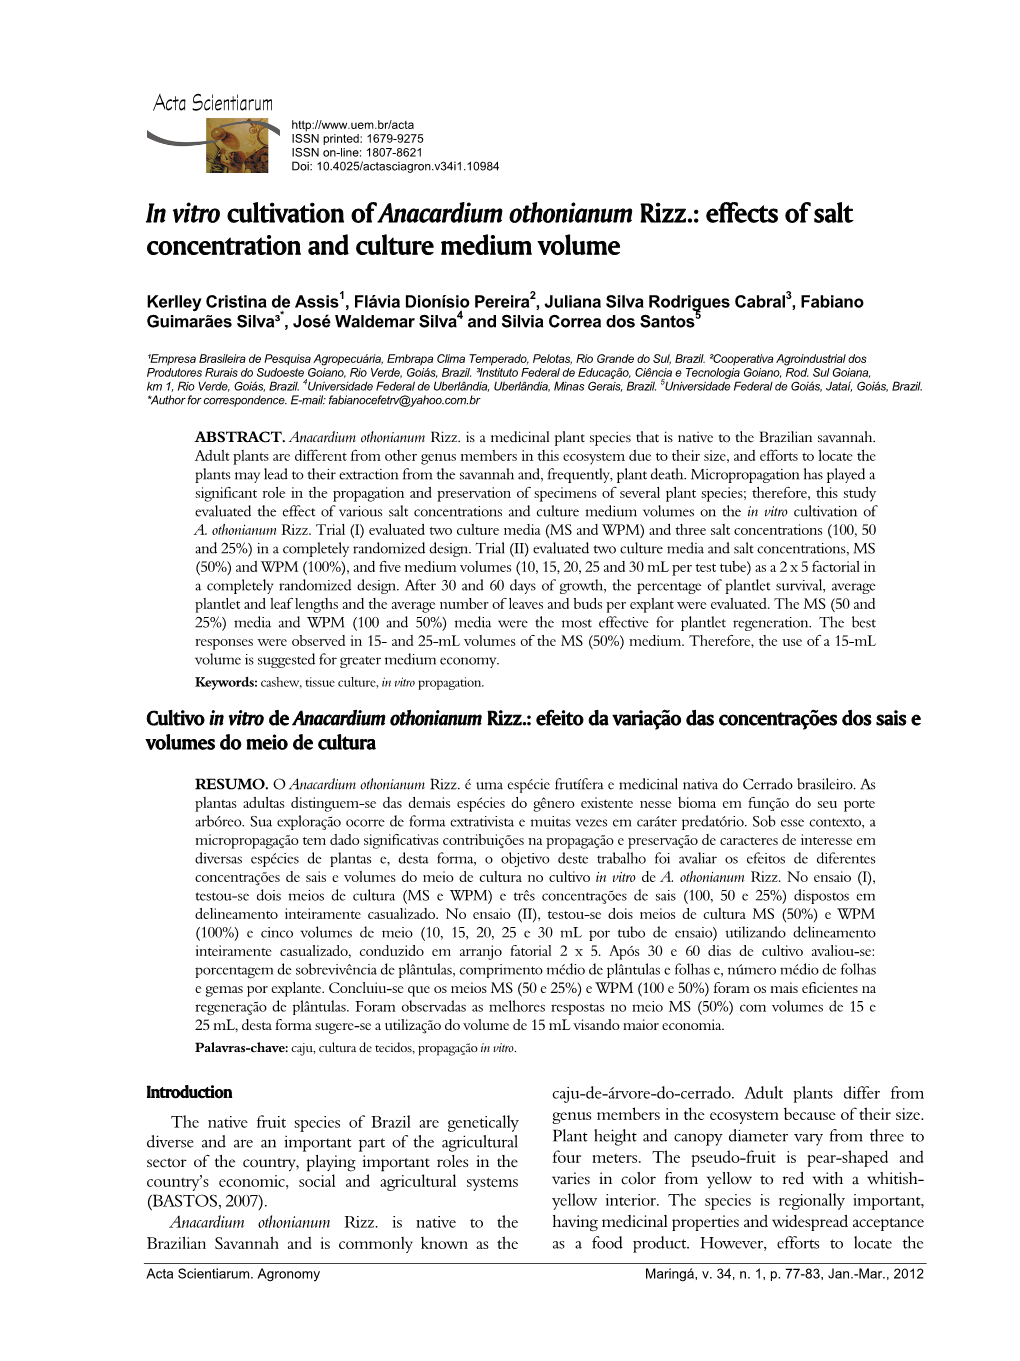 In Vitro Cultivation of Anacardium Othonianum Rizz.: Effects of Salt Concentration and Culture Medium Volume